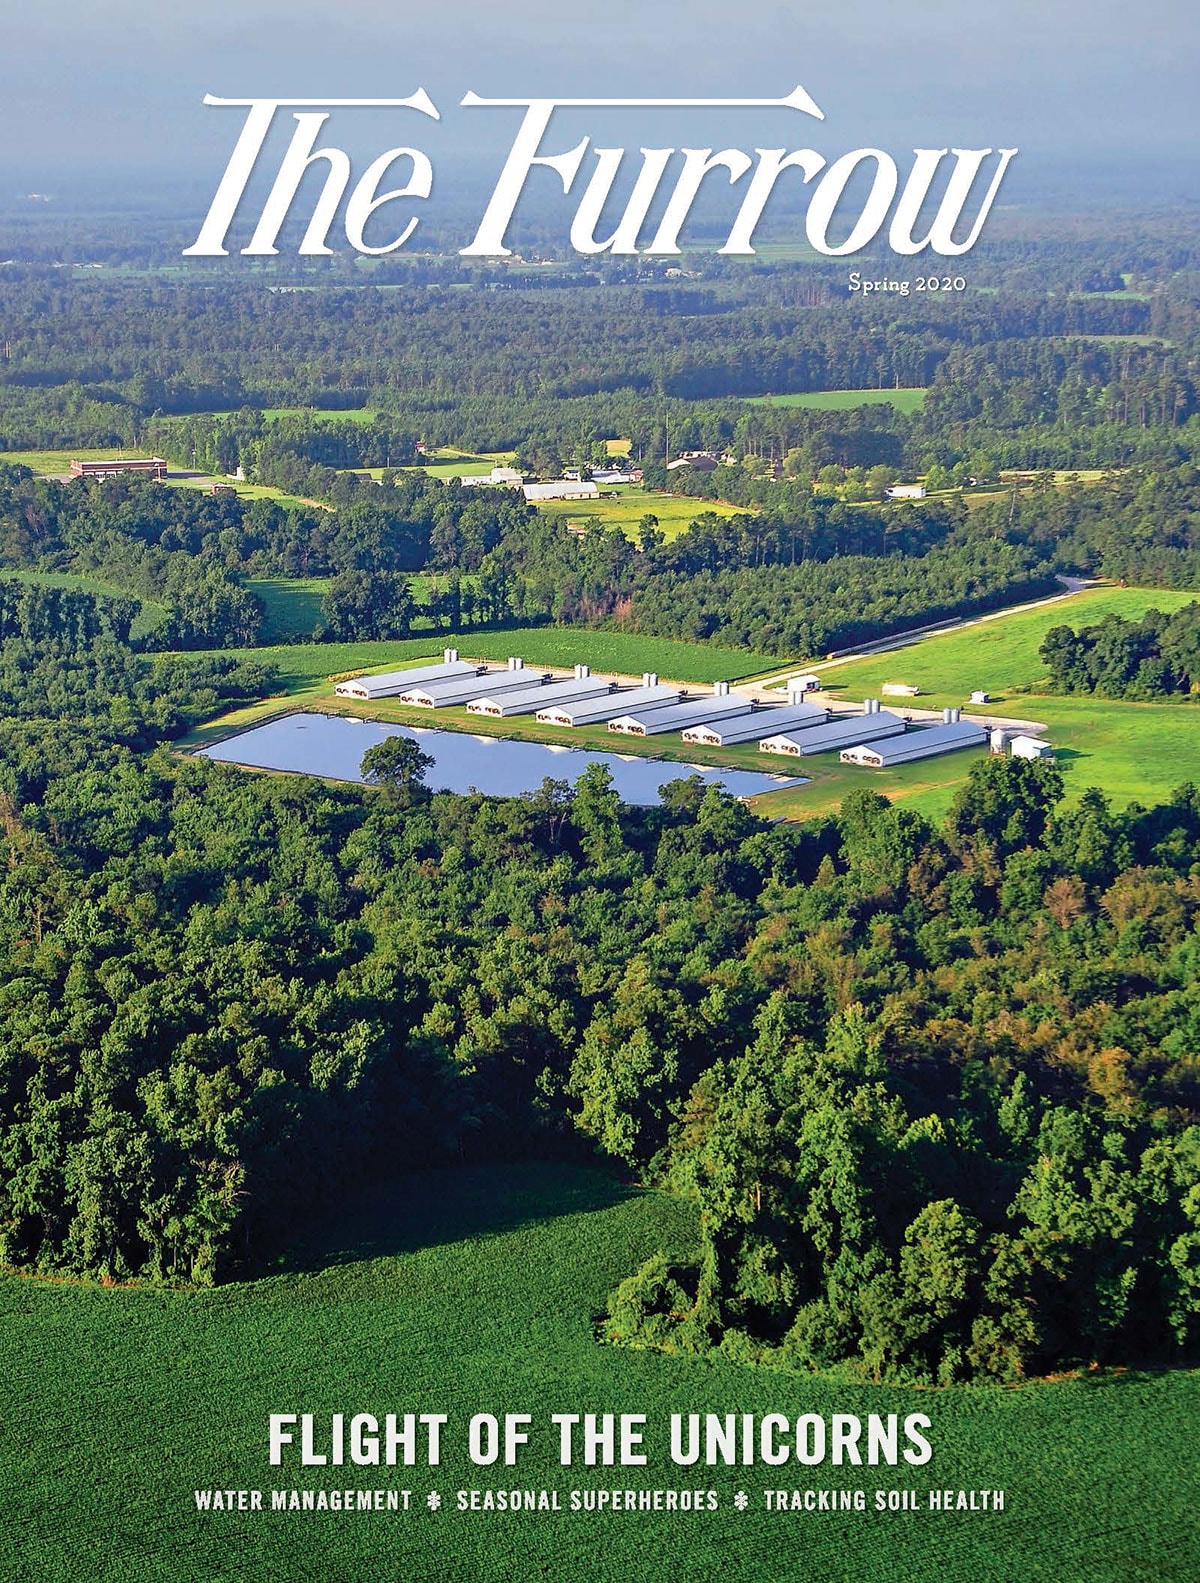 The Furrow - Spring 2020 Issue